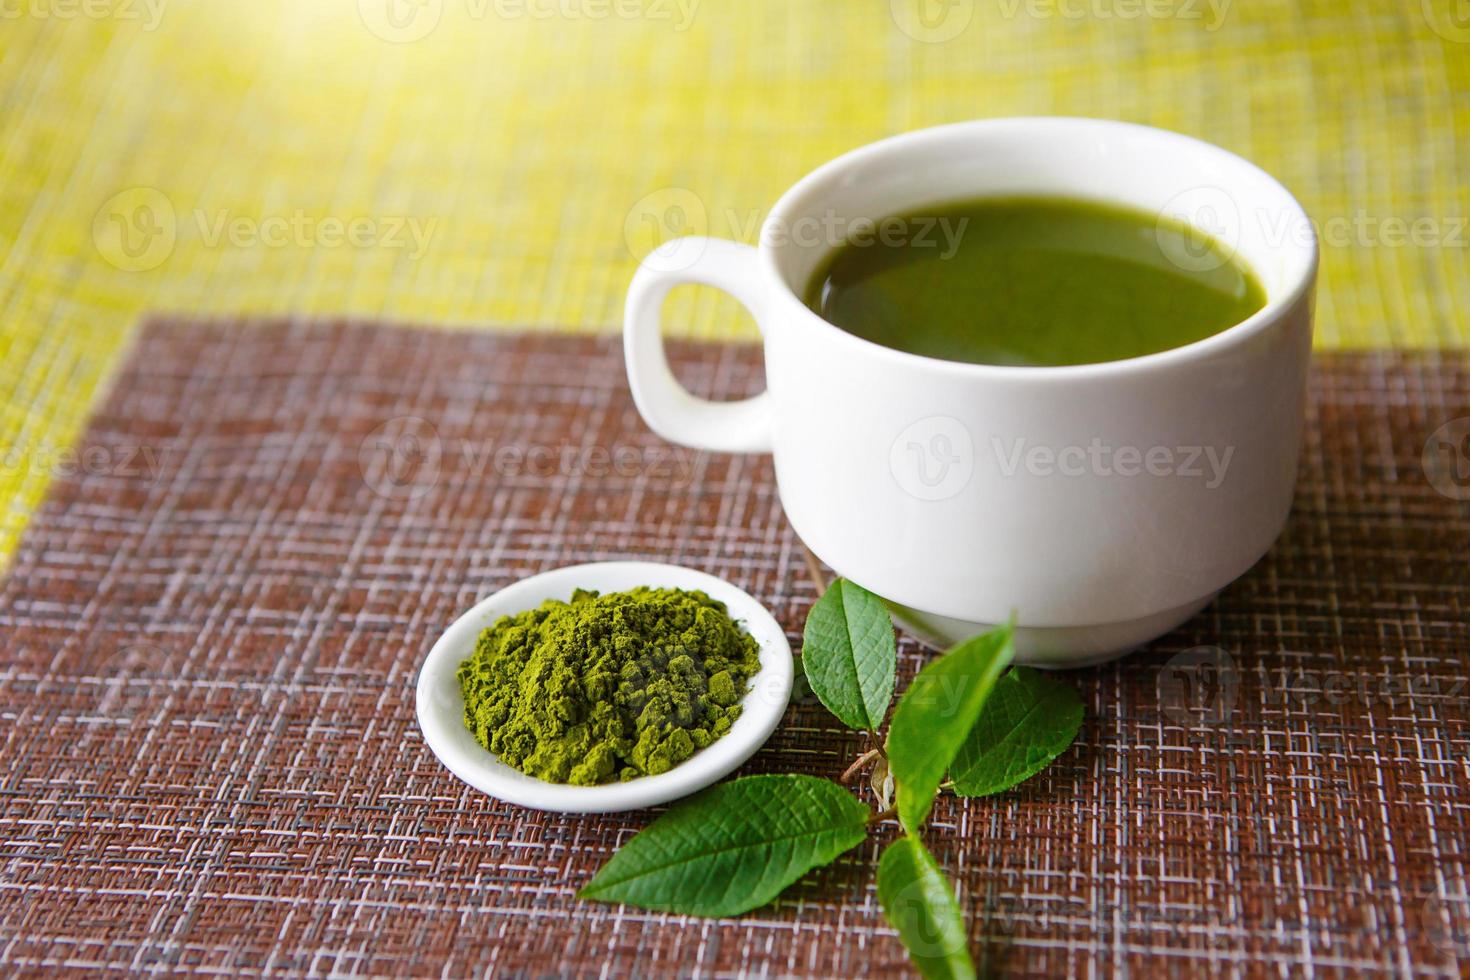 Japanese matcha green tea is poured into a white mug and on a white saucer in powder. Tea set on a textured napkin of natural flowers, decorated with a branch of green leaves. Cup with mock up photo